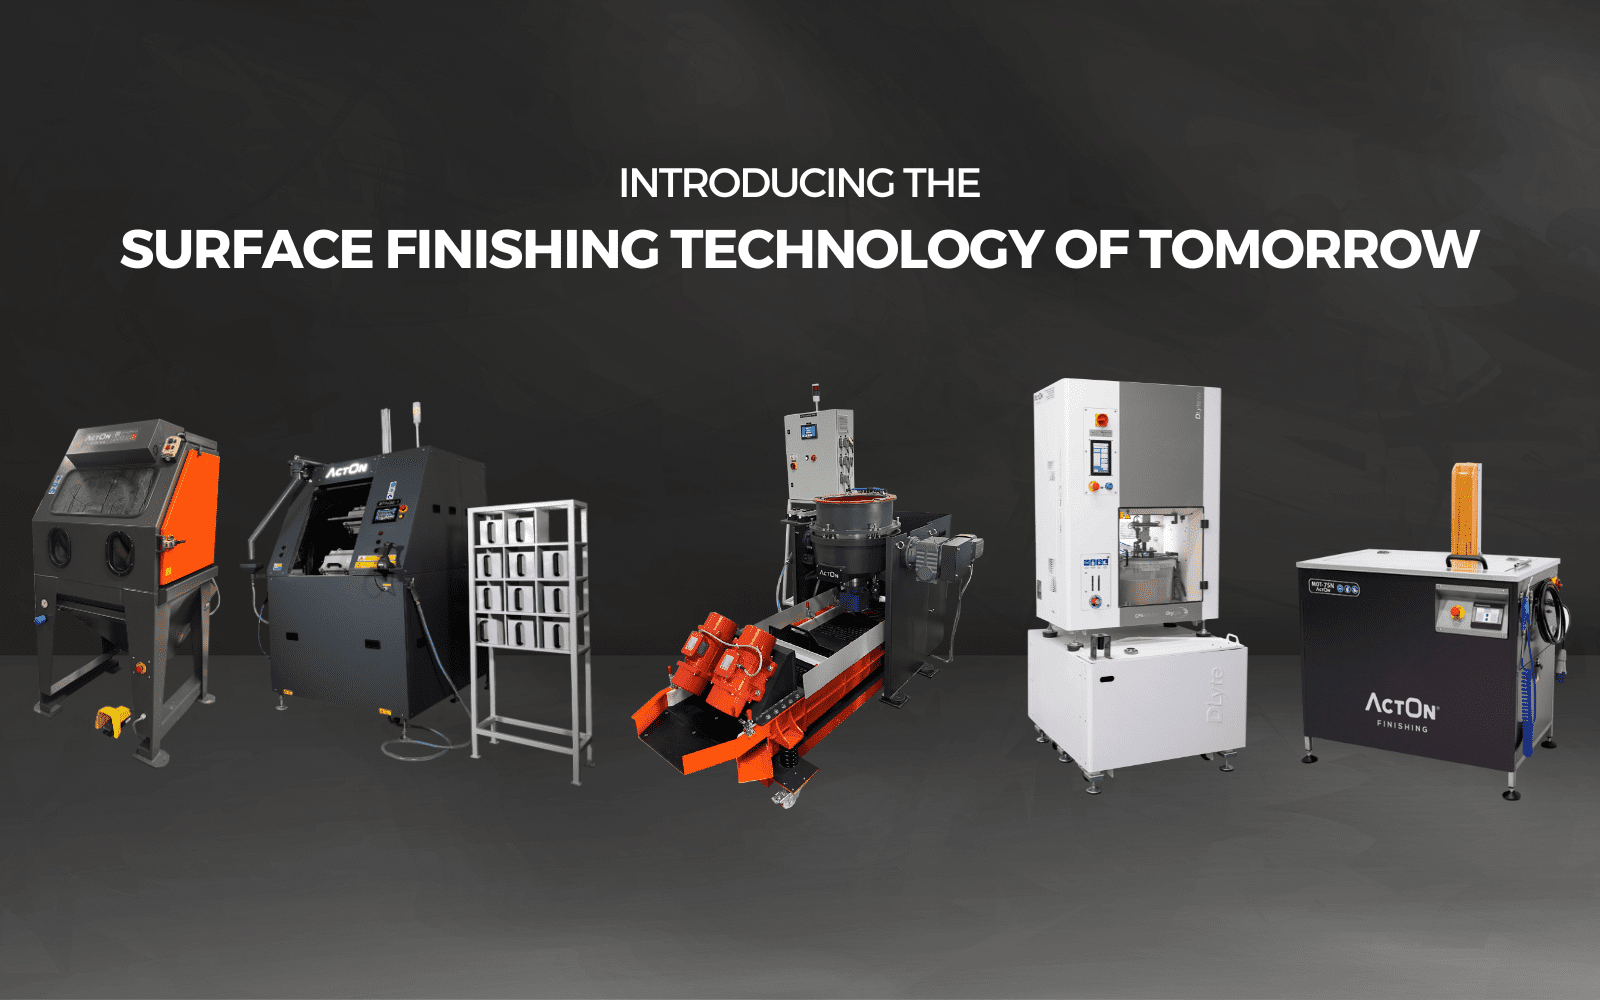 This year ActOn Finishing is proud to showcase at MACH their latest and complete surface finishing technology